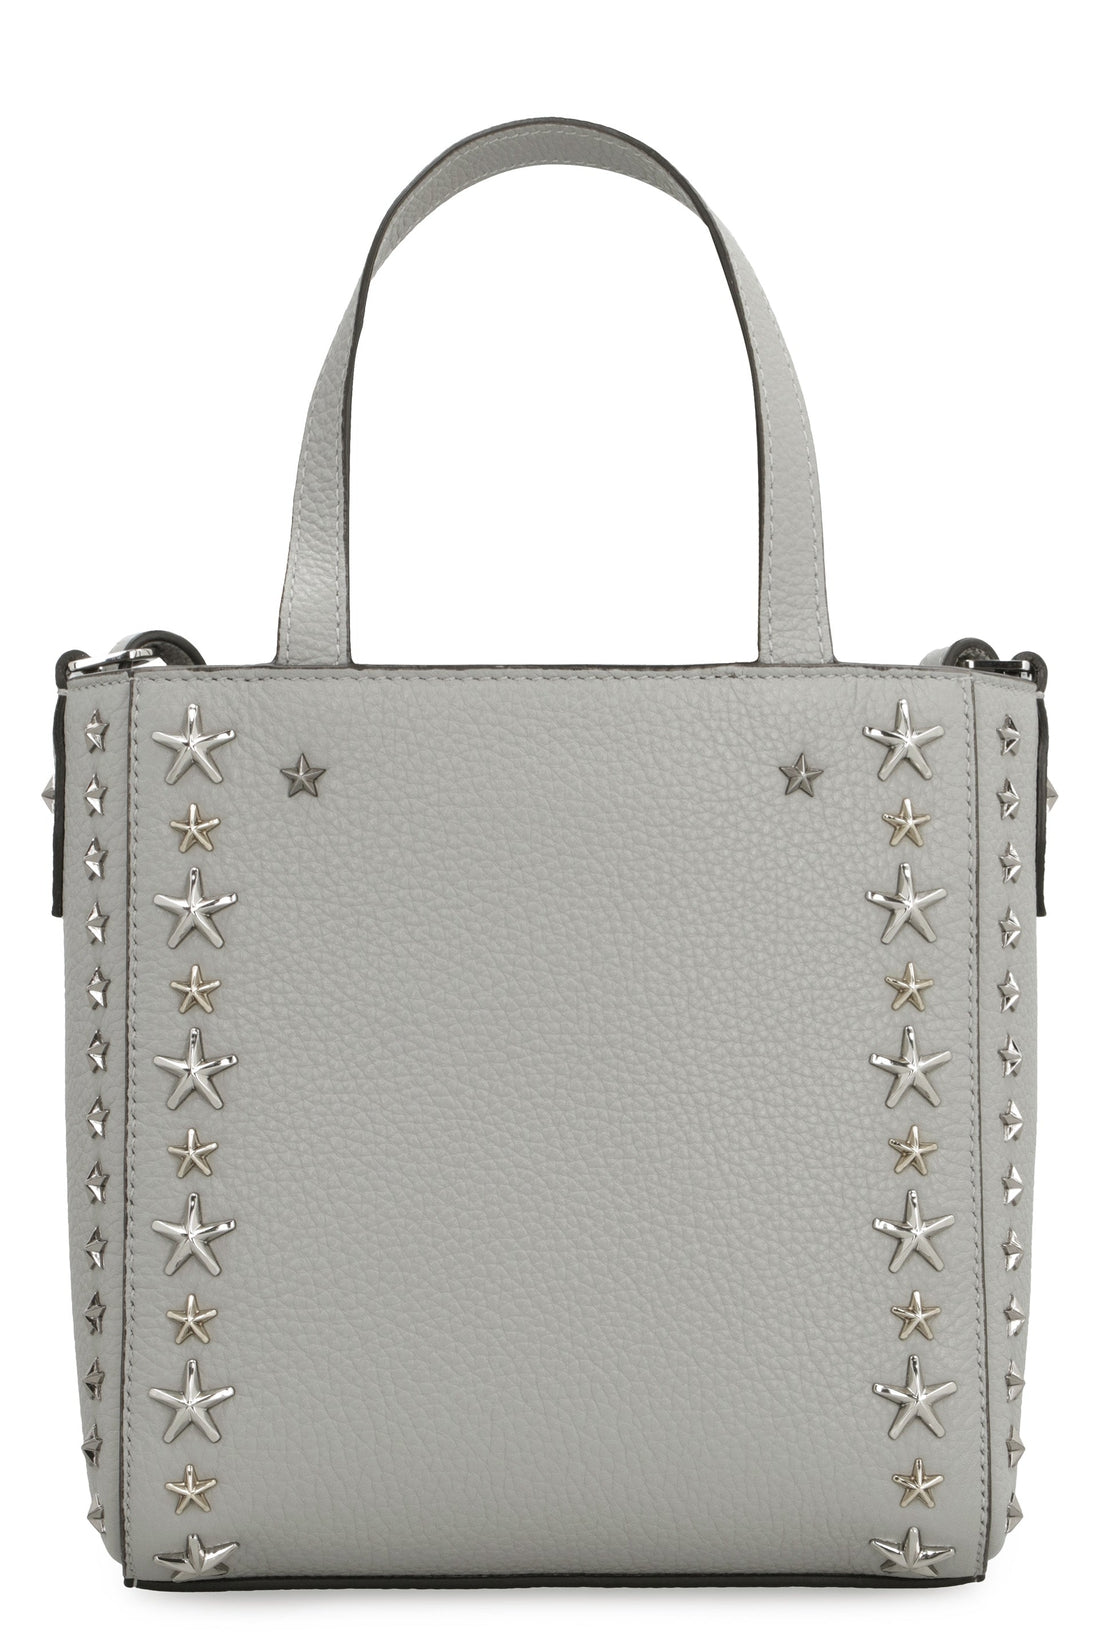 Jimmy Choo-OUTLET-SALE-Mini Pegasi leather tote-ARCHIVIST